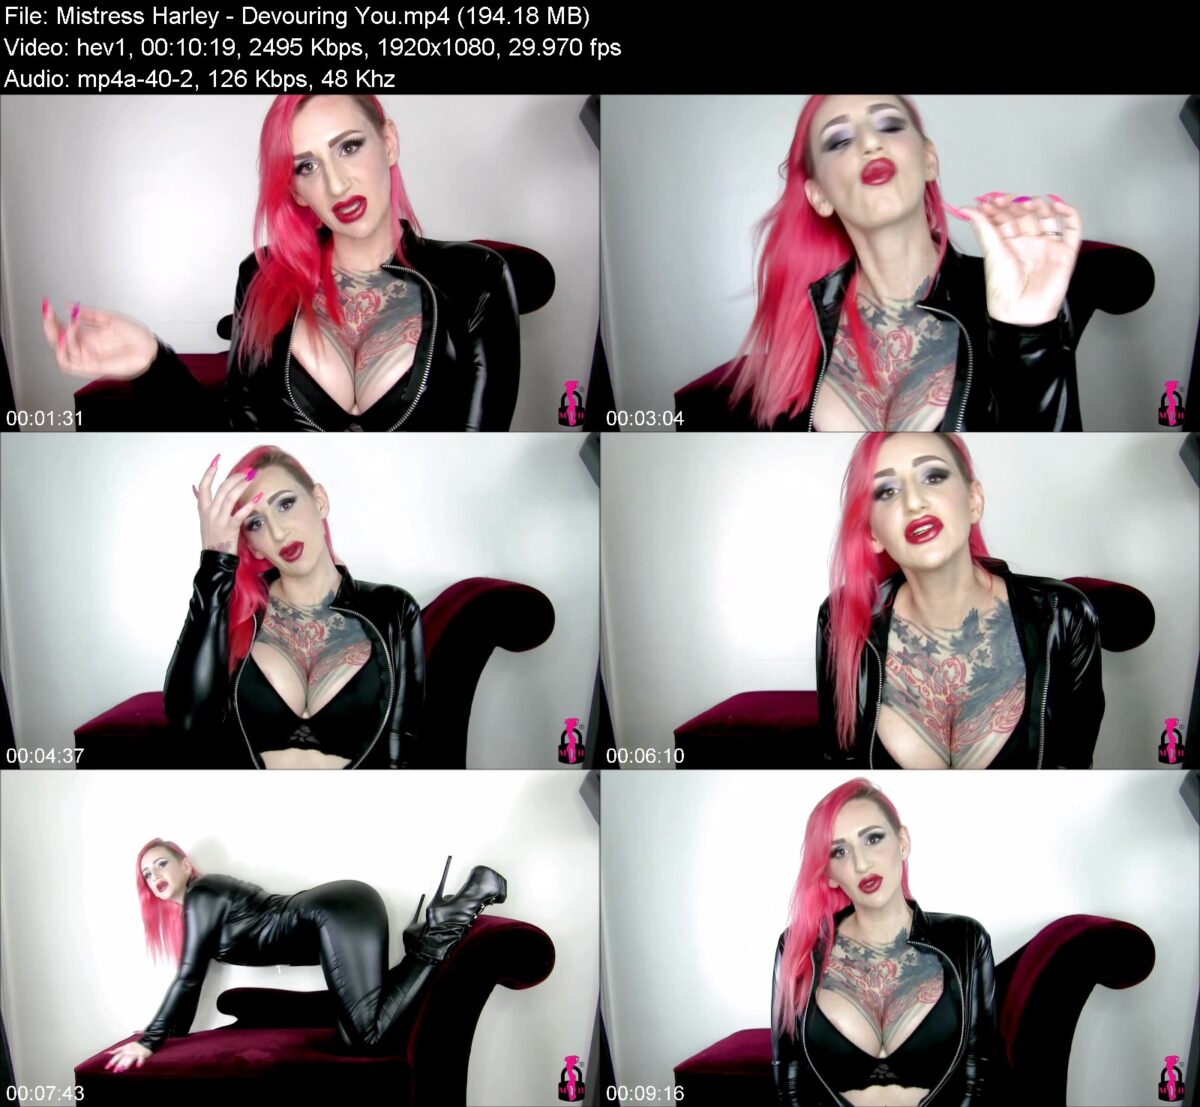 Actress: Mistress Harley. Title and Studio: Devouring You